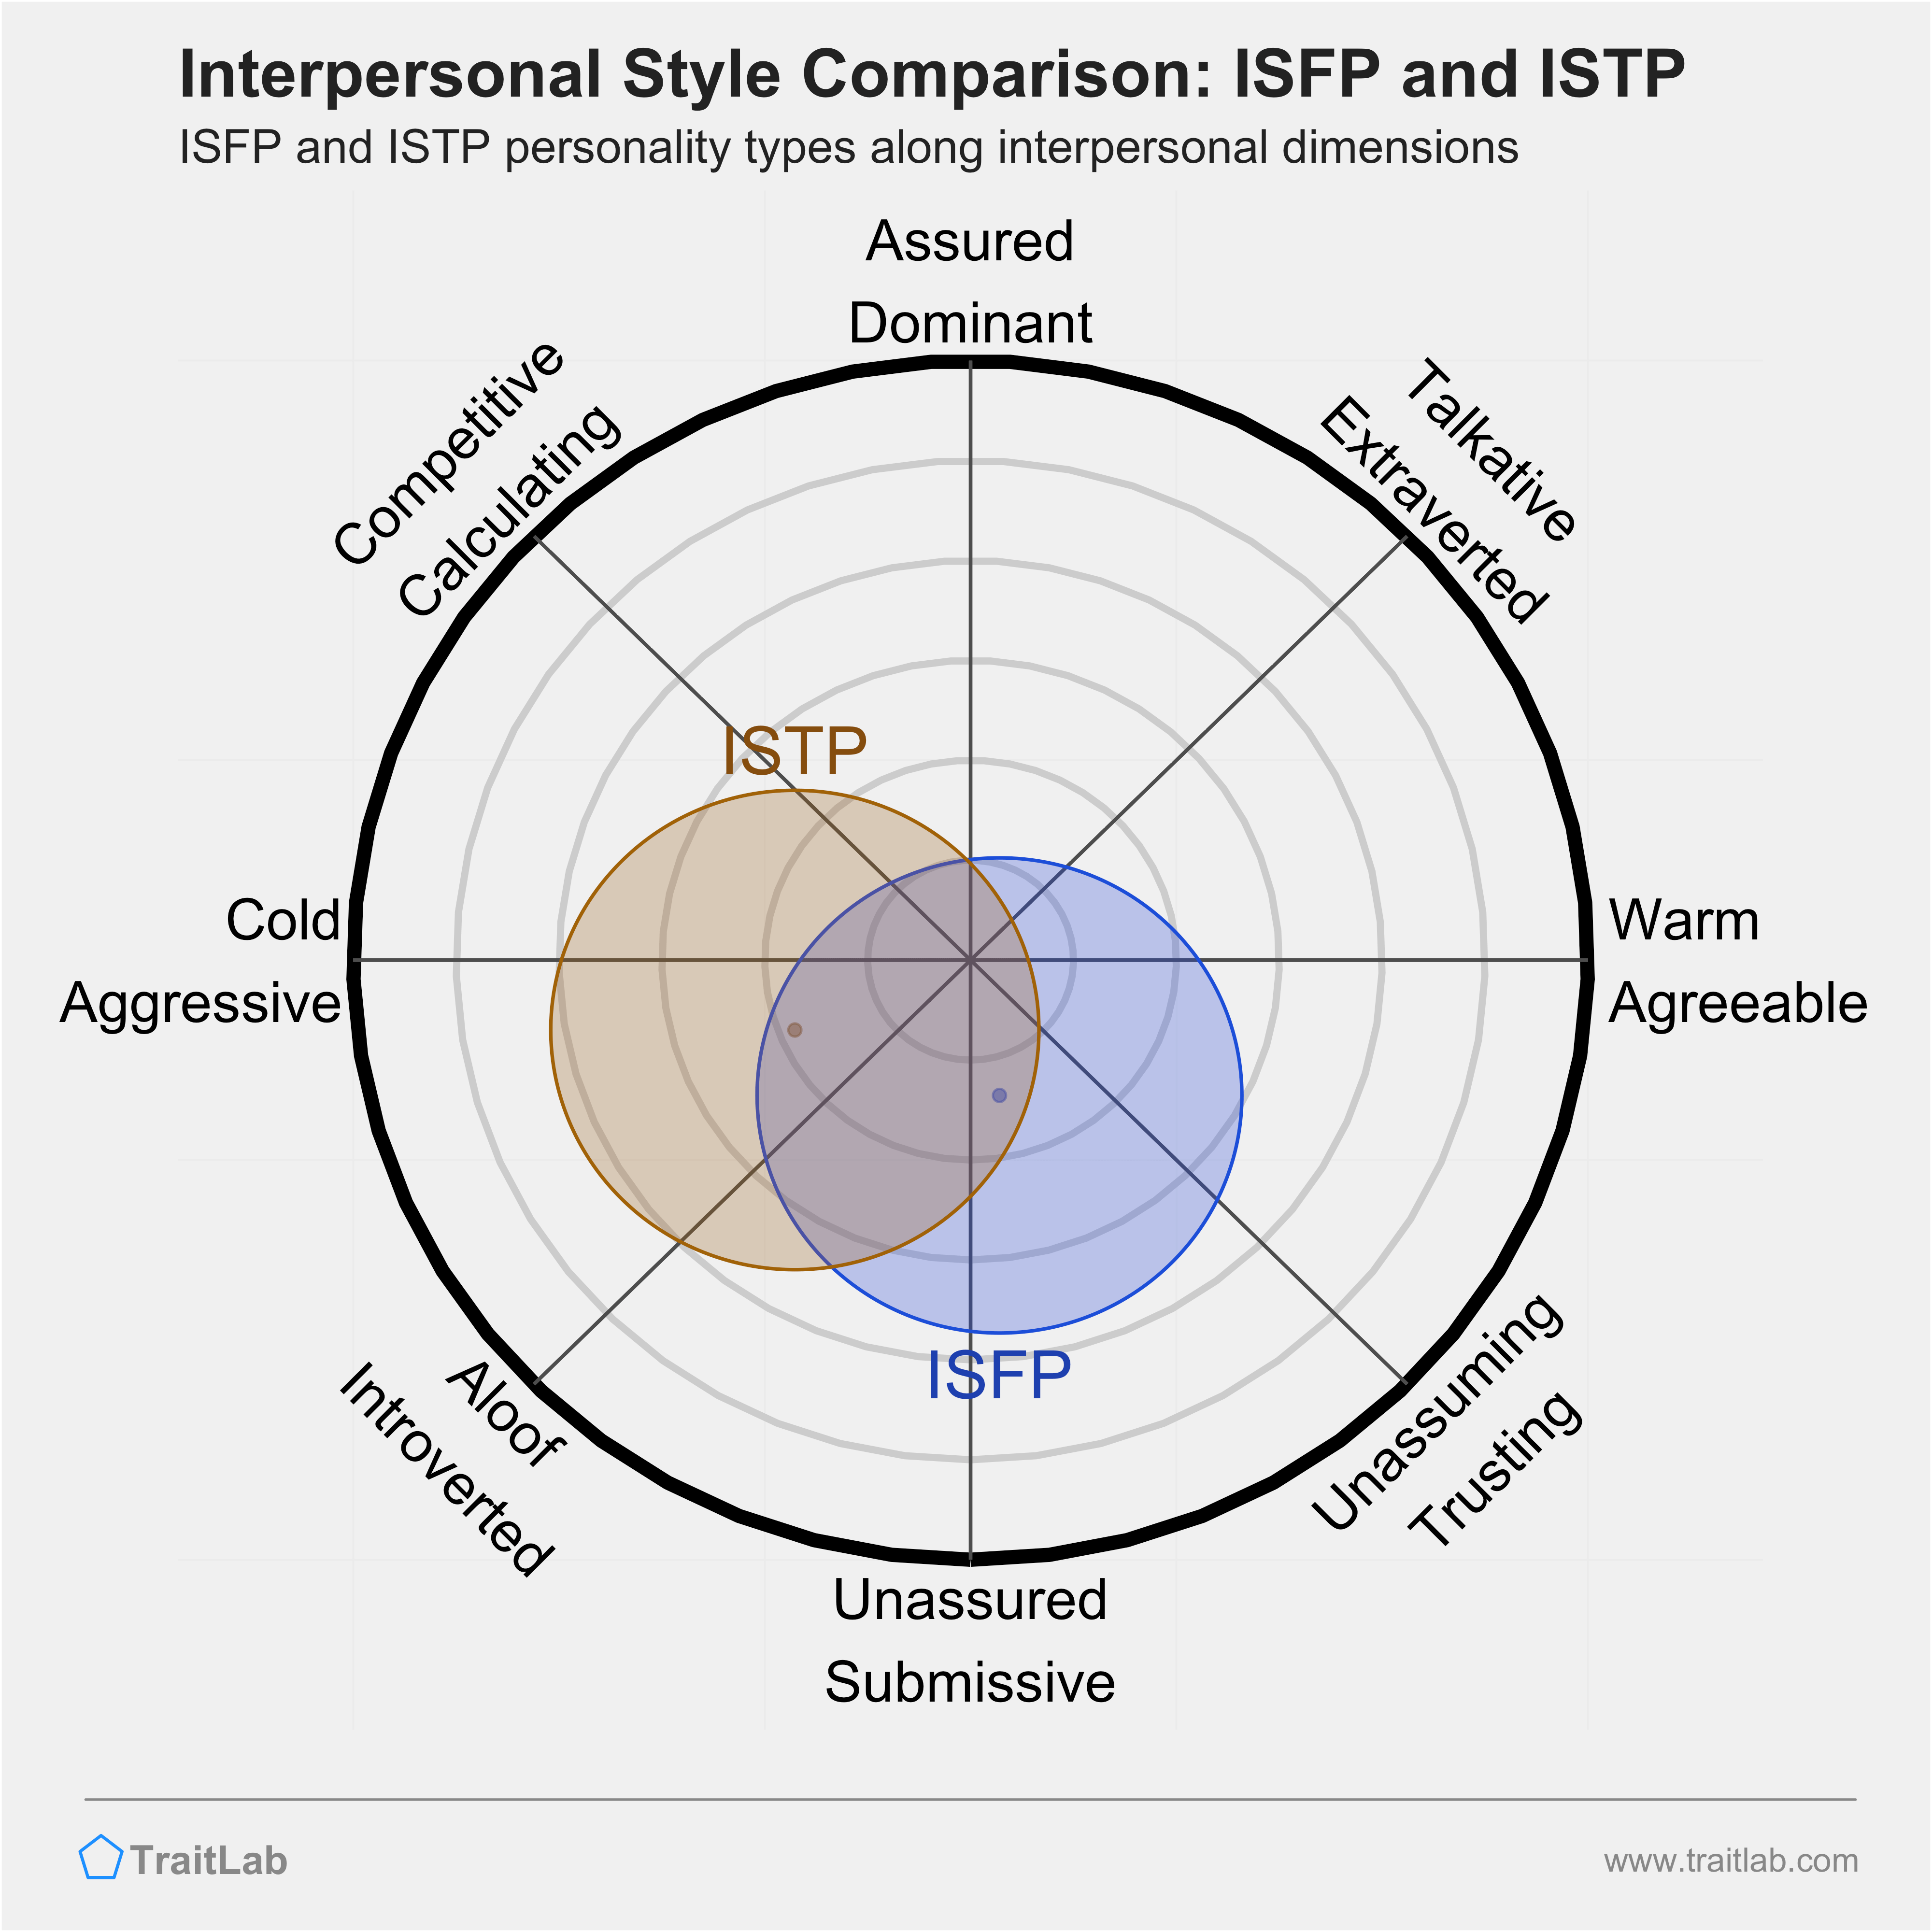 ISFP and ISTP comparison across interpersonal dimensions